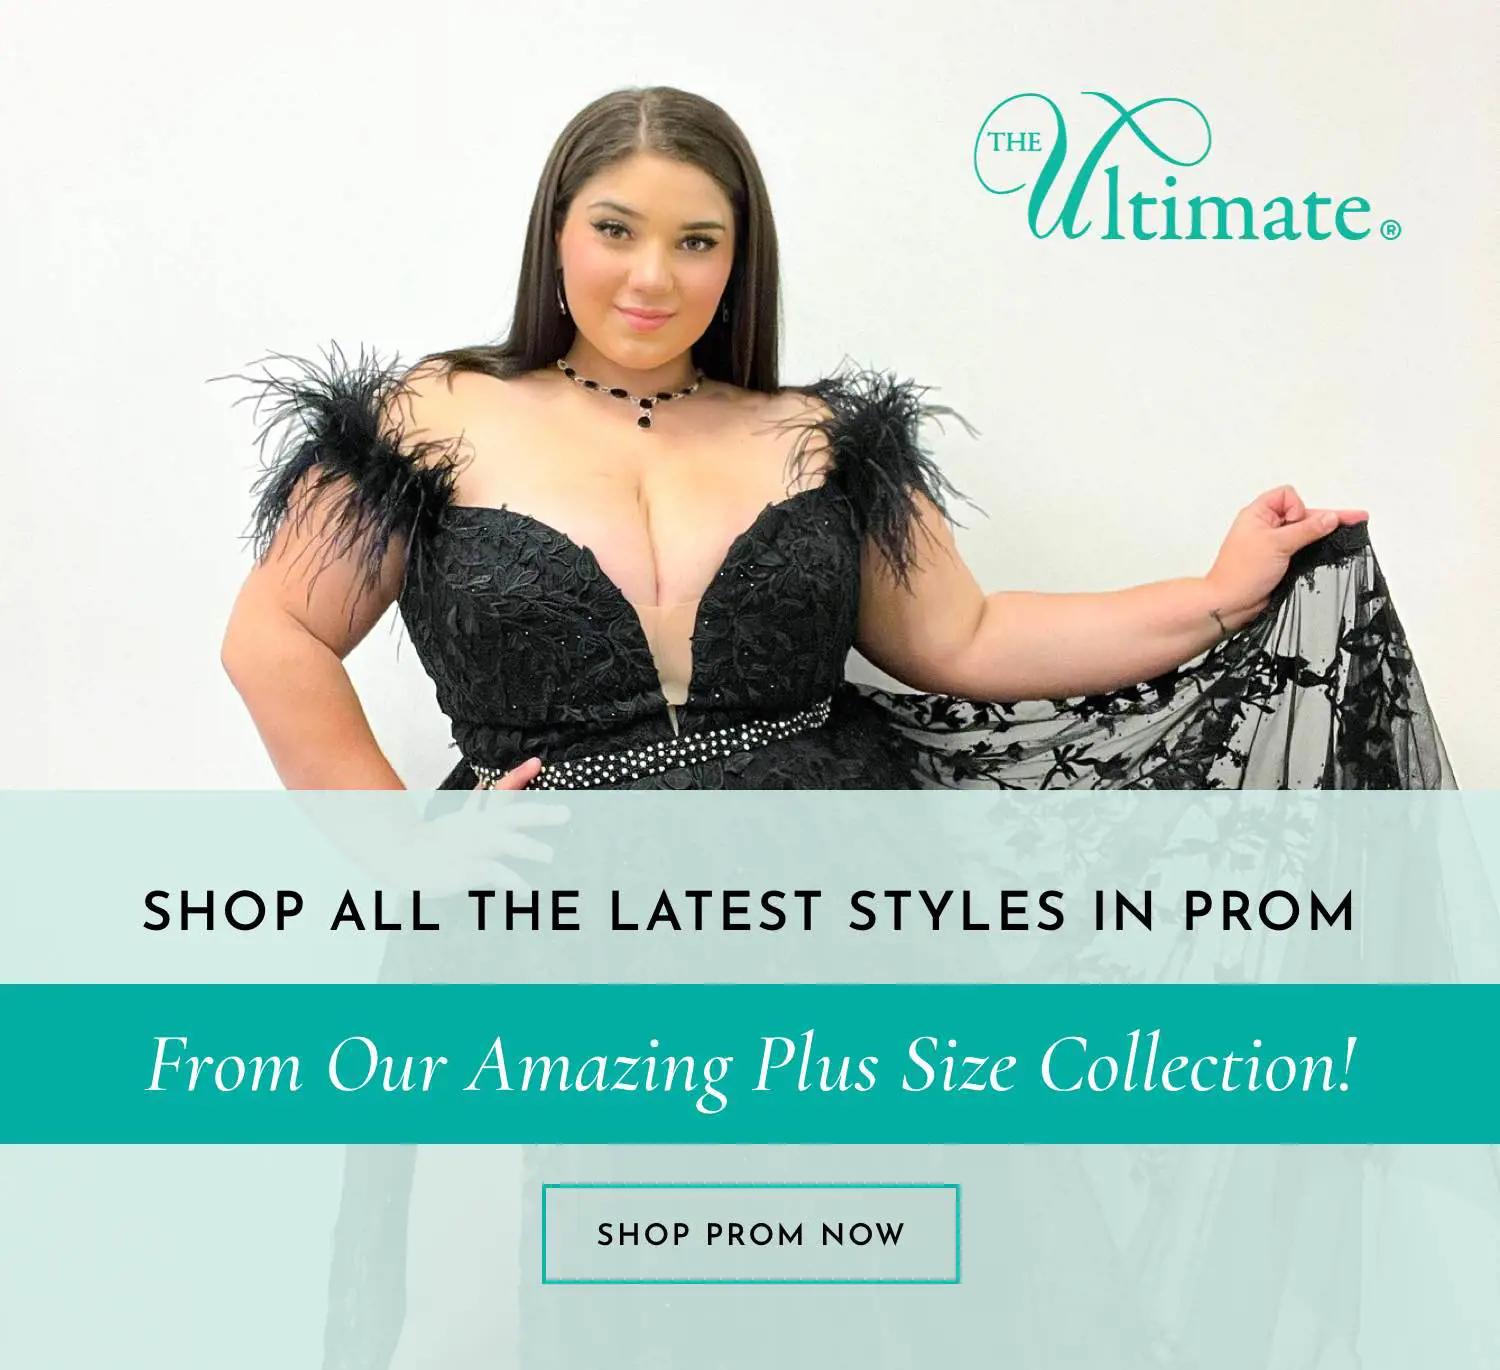 Shop all the latest styles in Prom